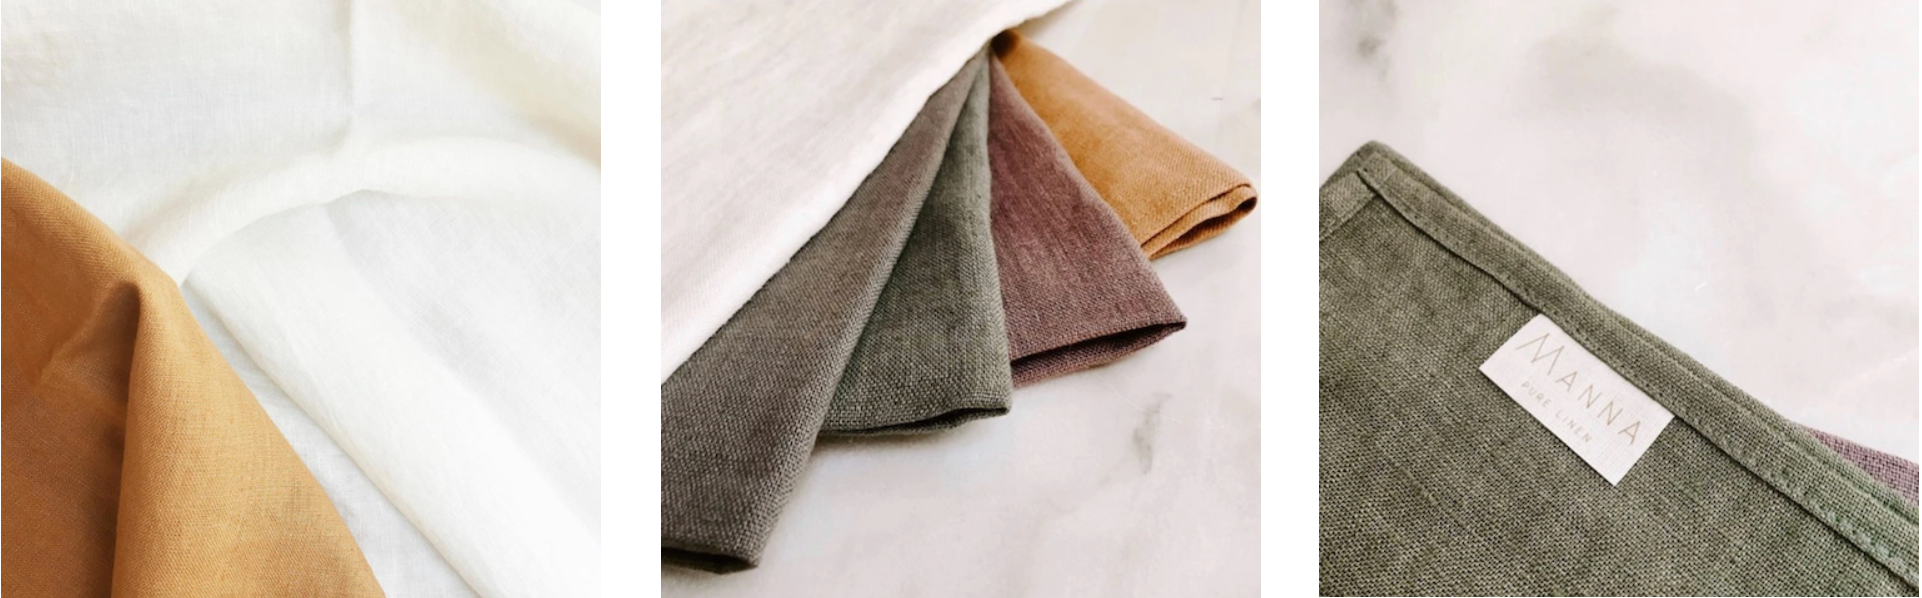 Linen: An age old tool for the modern world – Manna